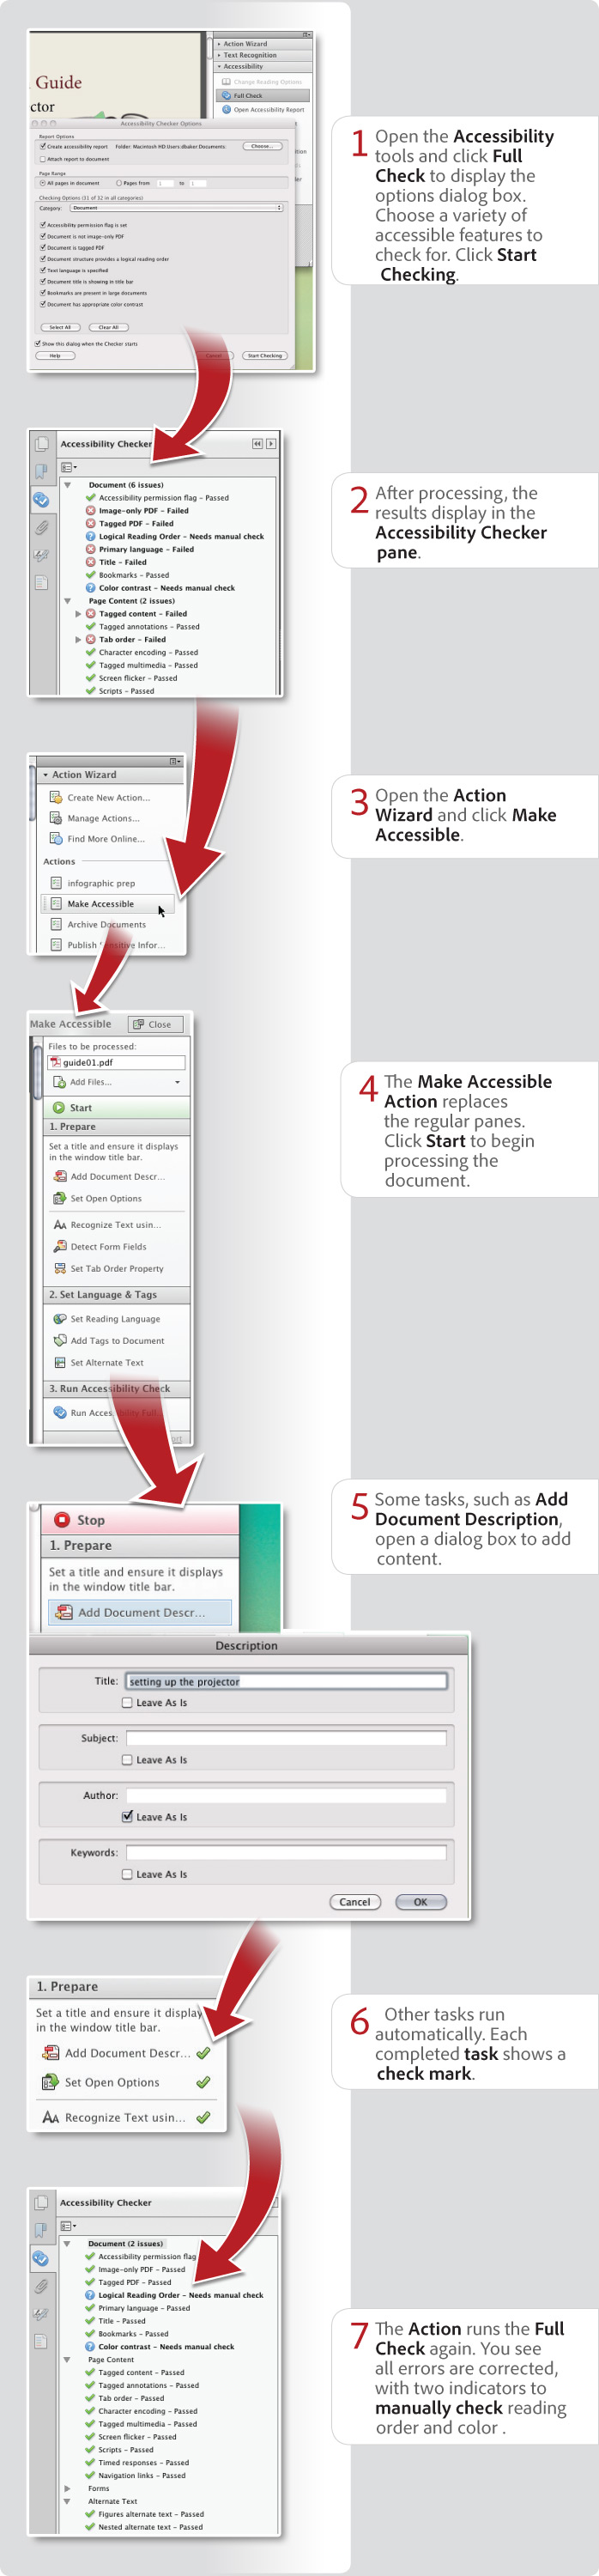 How to ensure your PDF file is accessible using Acrobat XI